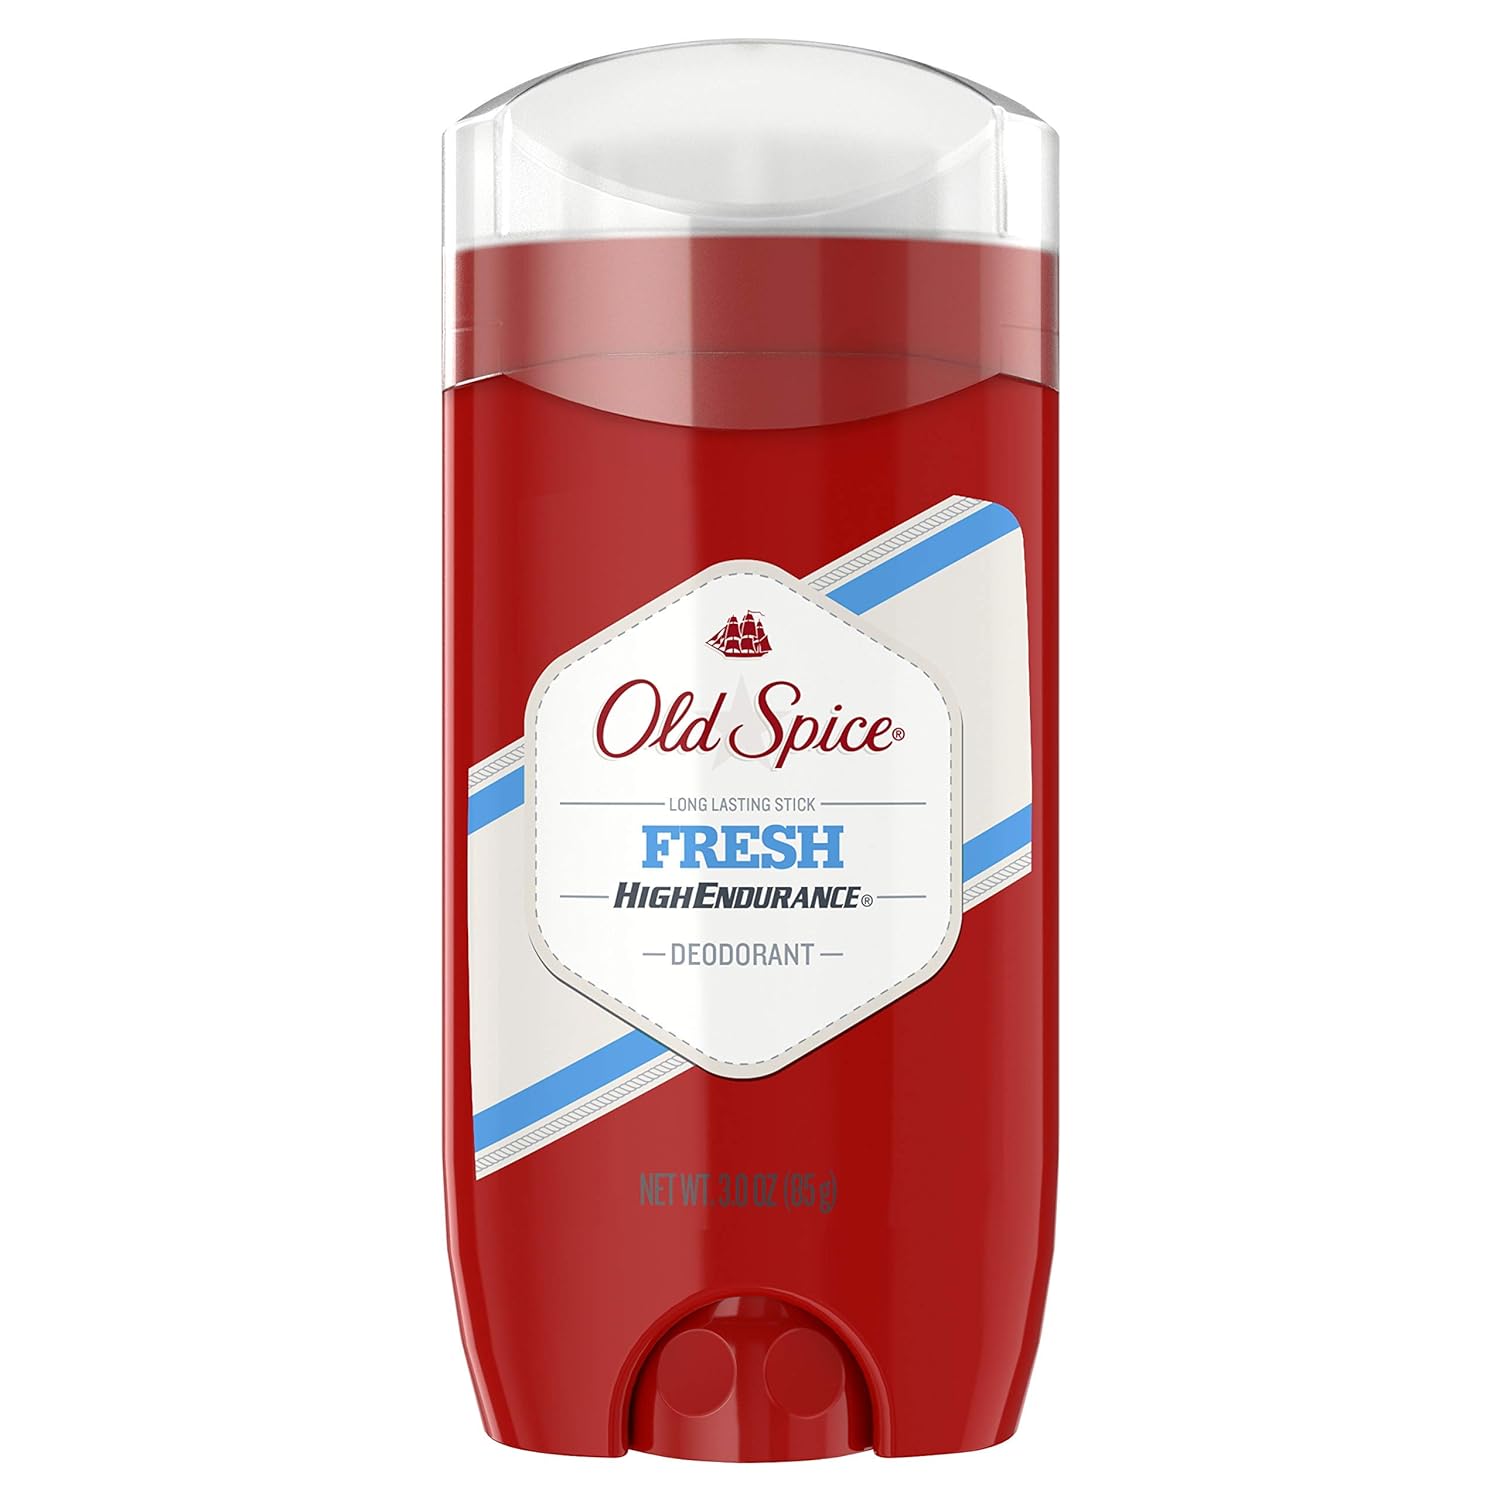  Old Spice High Endurance Long Lasting Deodorant, Fresh, 3 Ounce (Pack of 3)